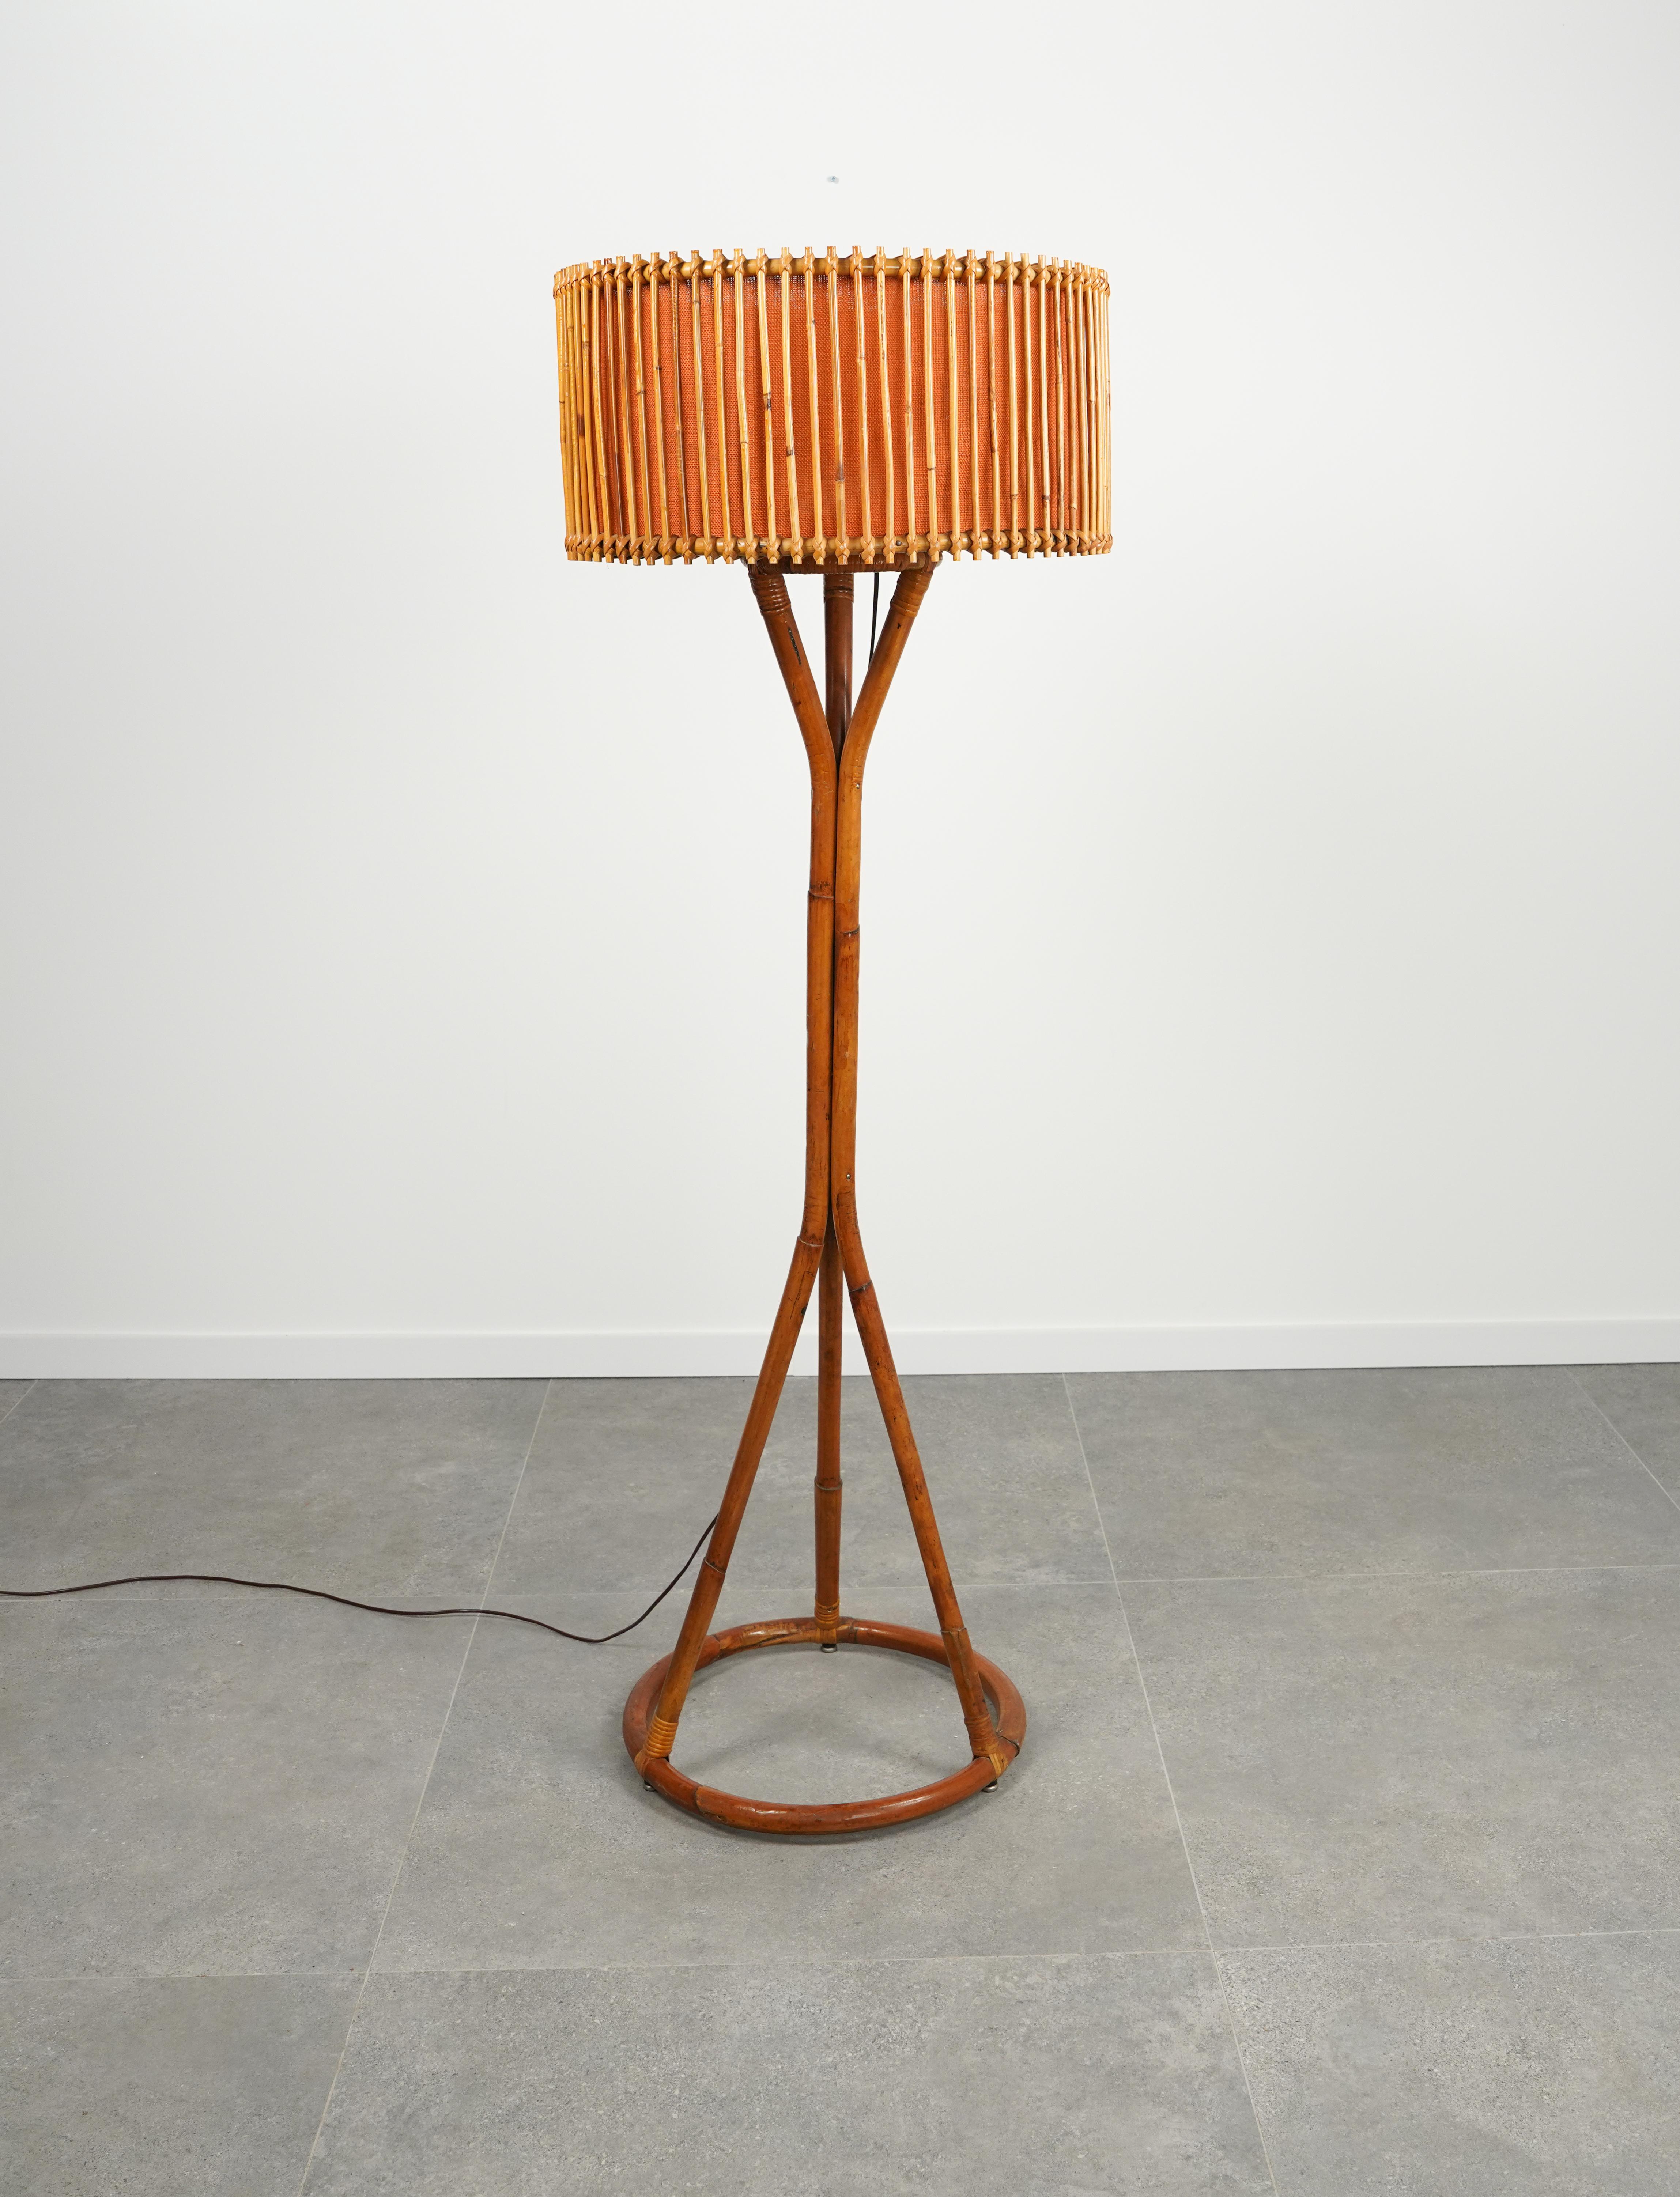 Midcentury Bamboo and Rattan Floor Lamp Franco Albini Style, Italy 1960s For Sale 3